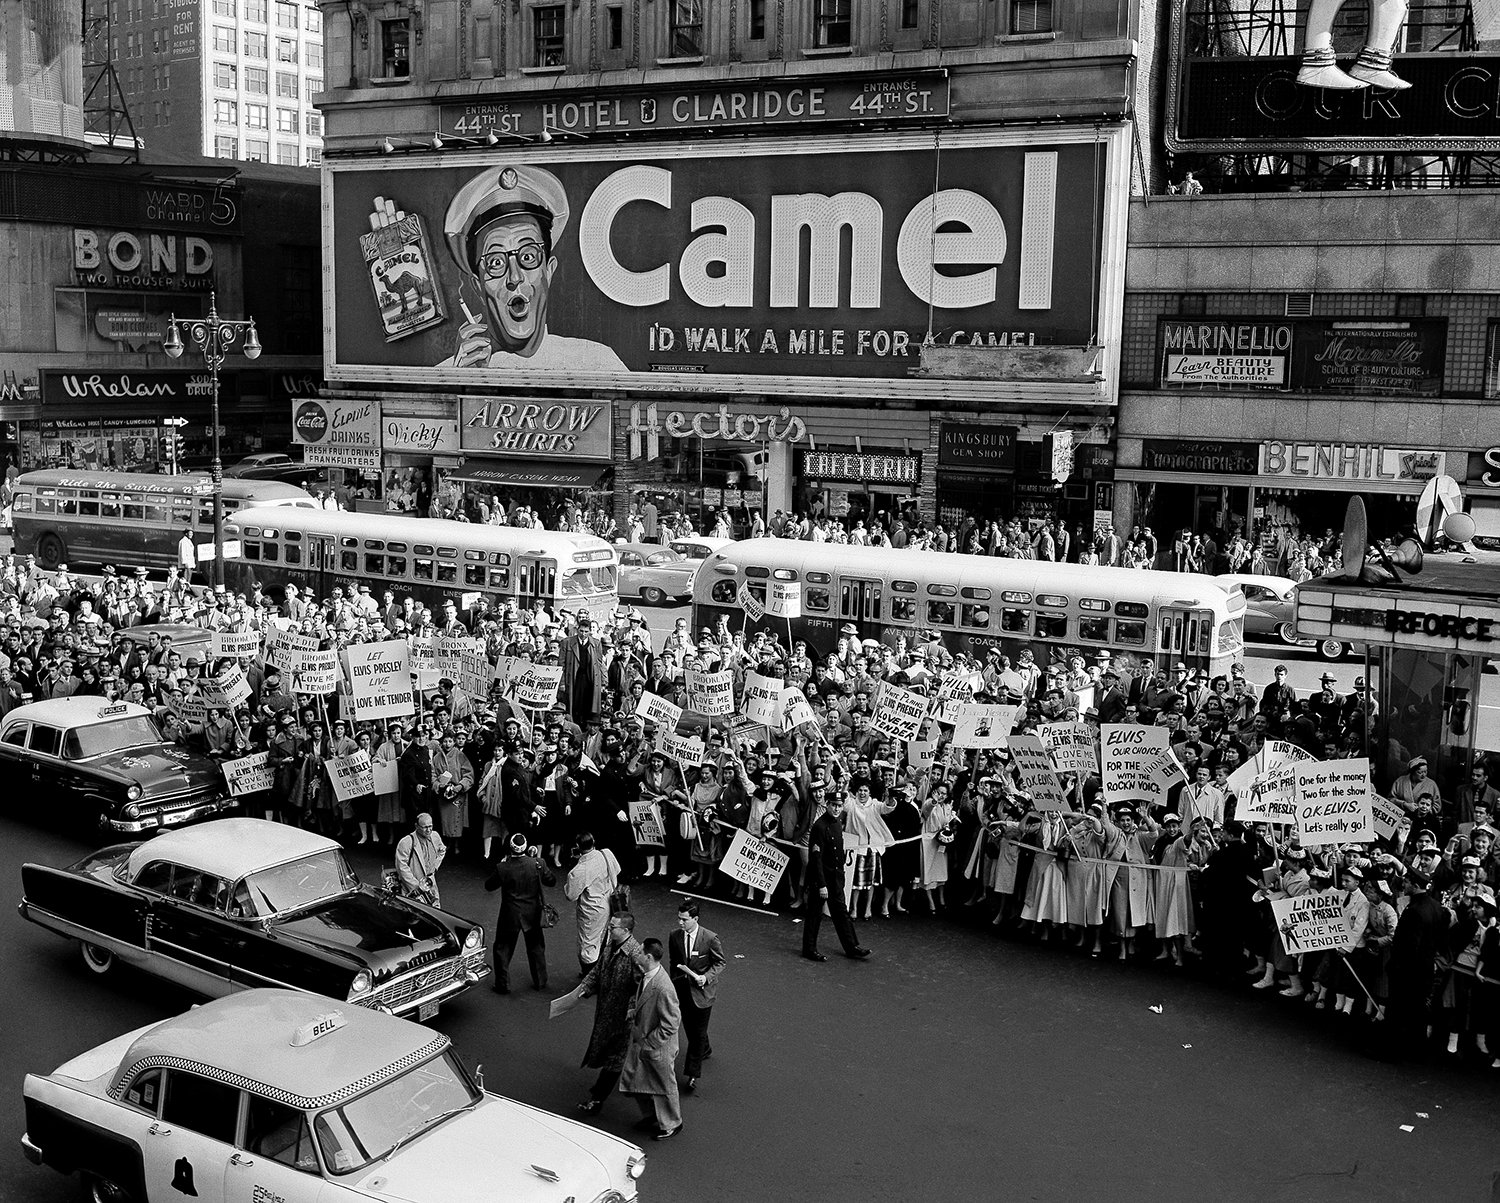  Some 1,000 teenagers, carrying placards, attend the unveiling of a 40-foot cardboard likeness of Elvis Presley on a marquee outside Paramount Theater, New York, on Oct. 28,1956. Failure of Elvis Presley to appear is said to have made it easier for 1